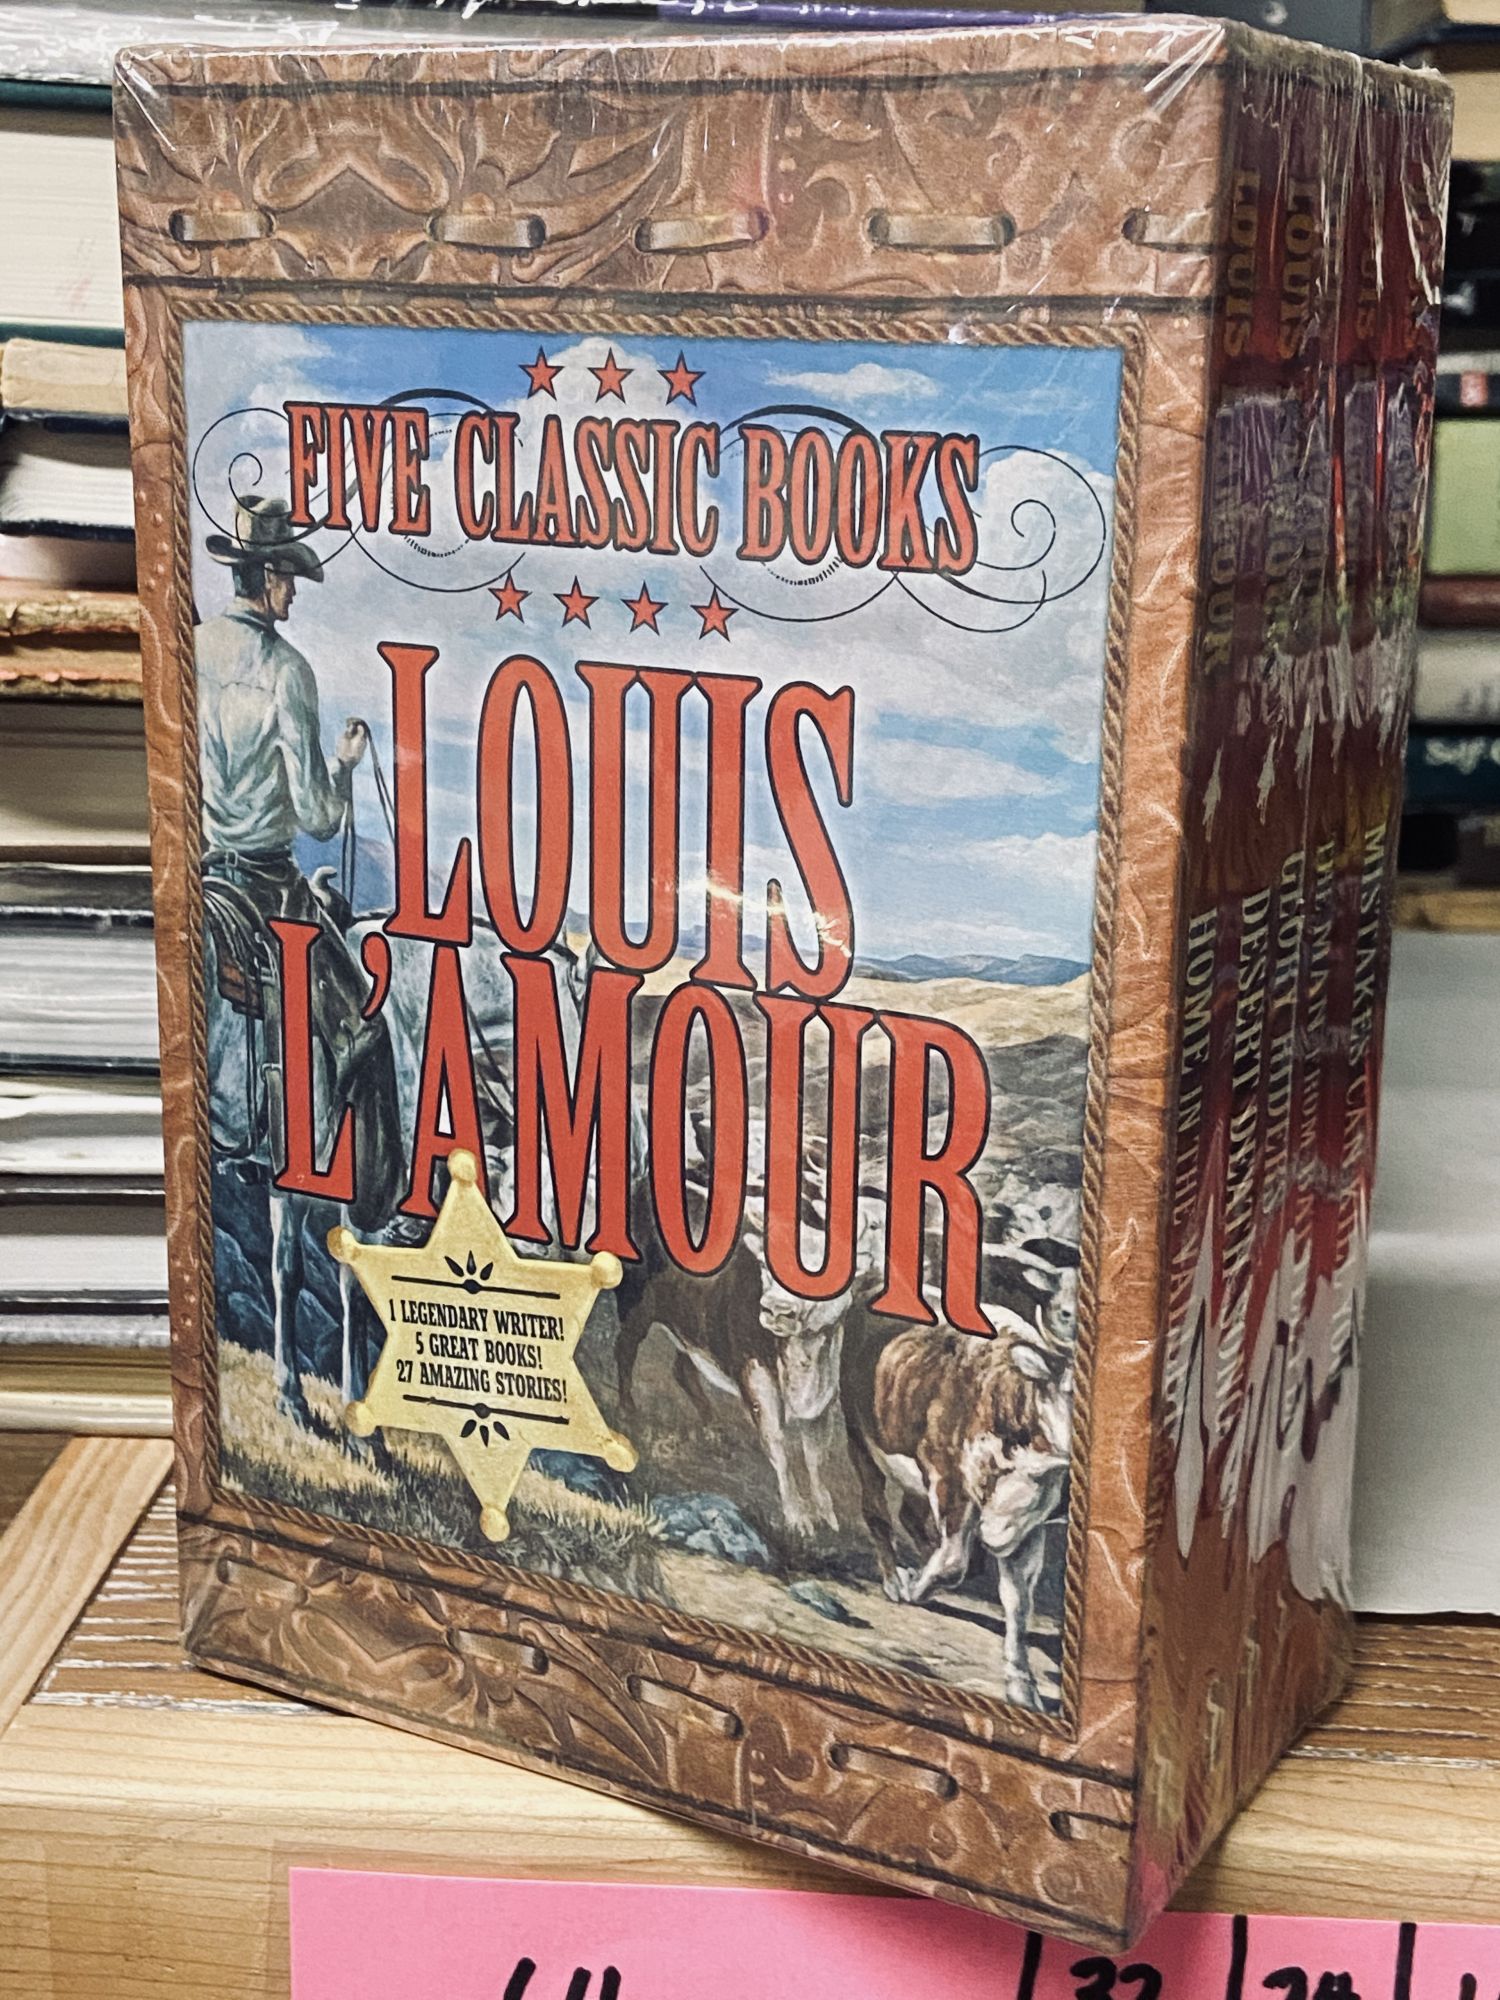 The Louis L'amour Collection - 128 Leather Vols. Of Westerns Auction